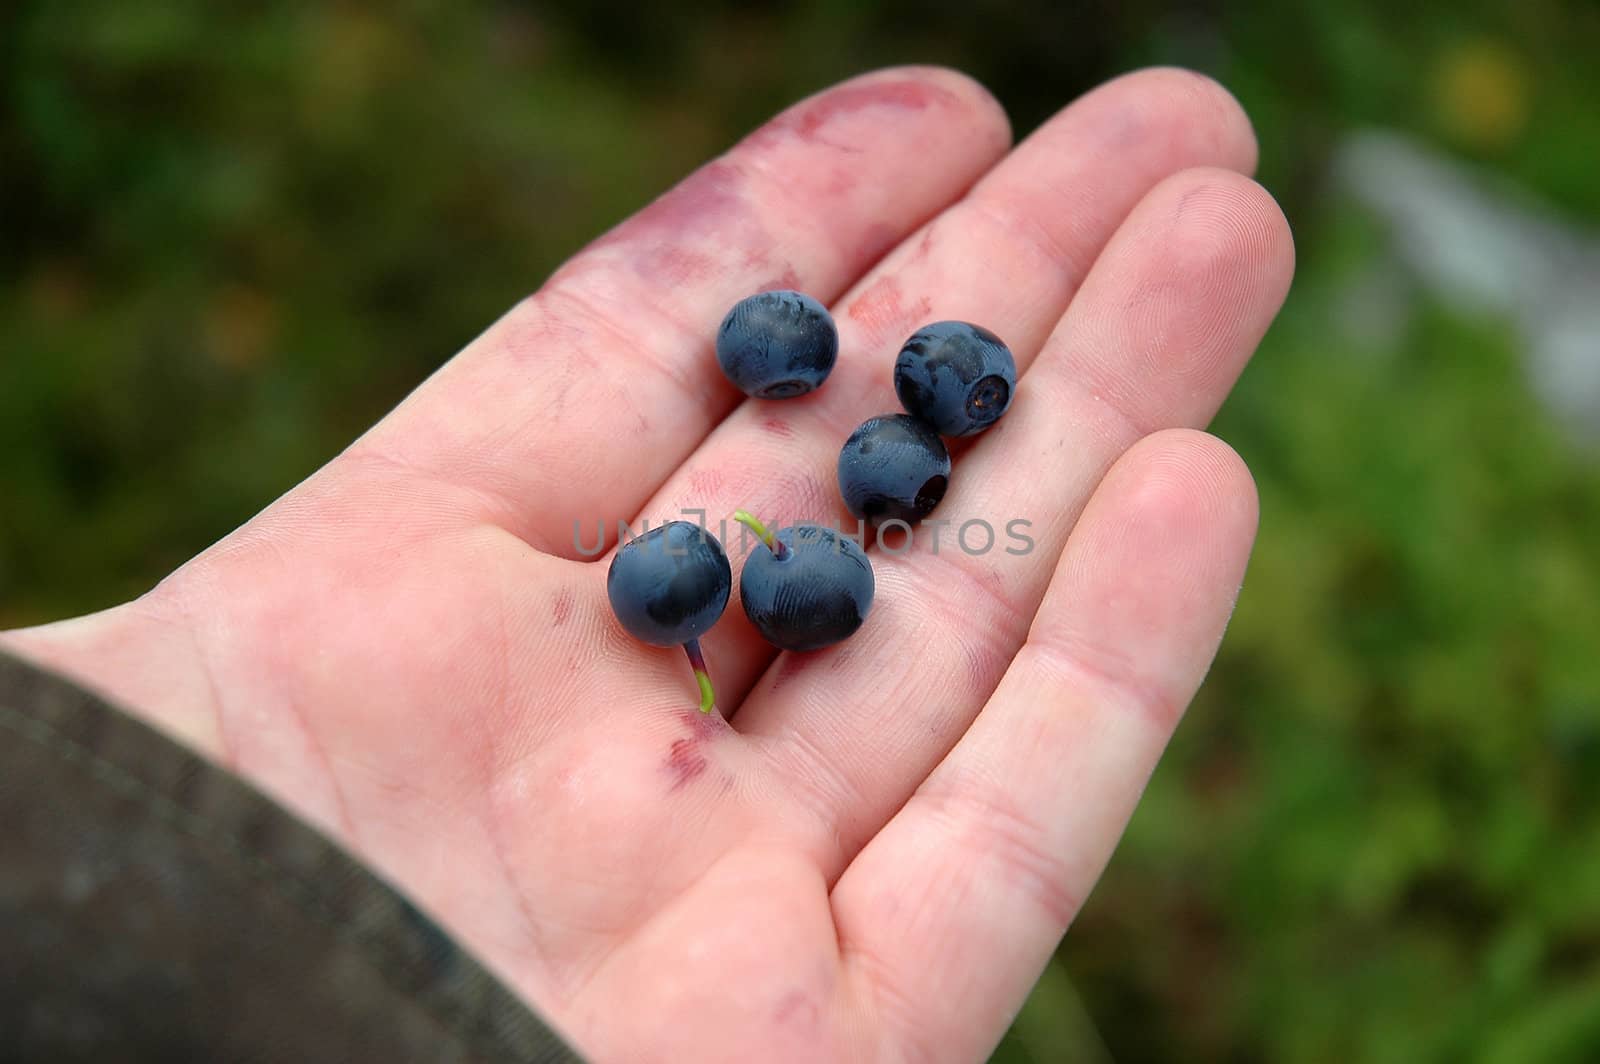 Blueberries in hand by kekanger